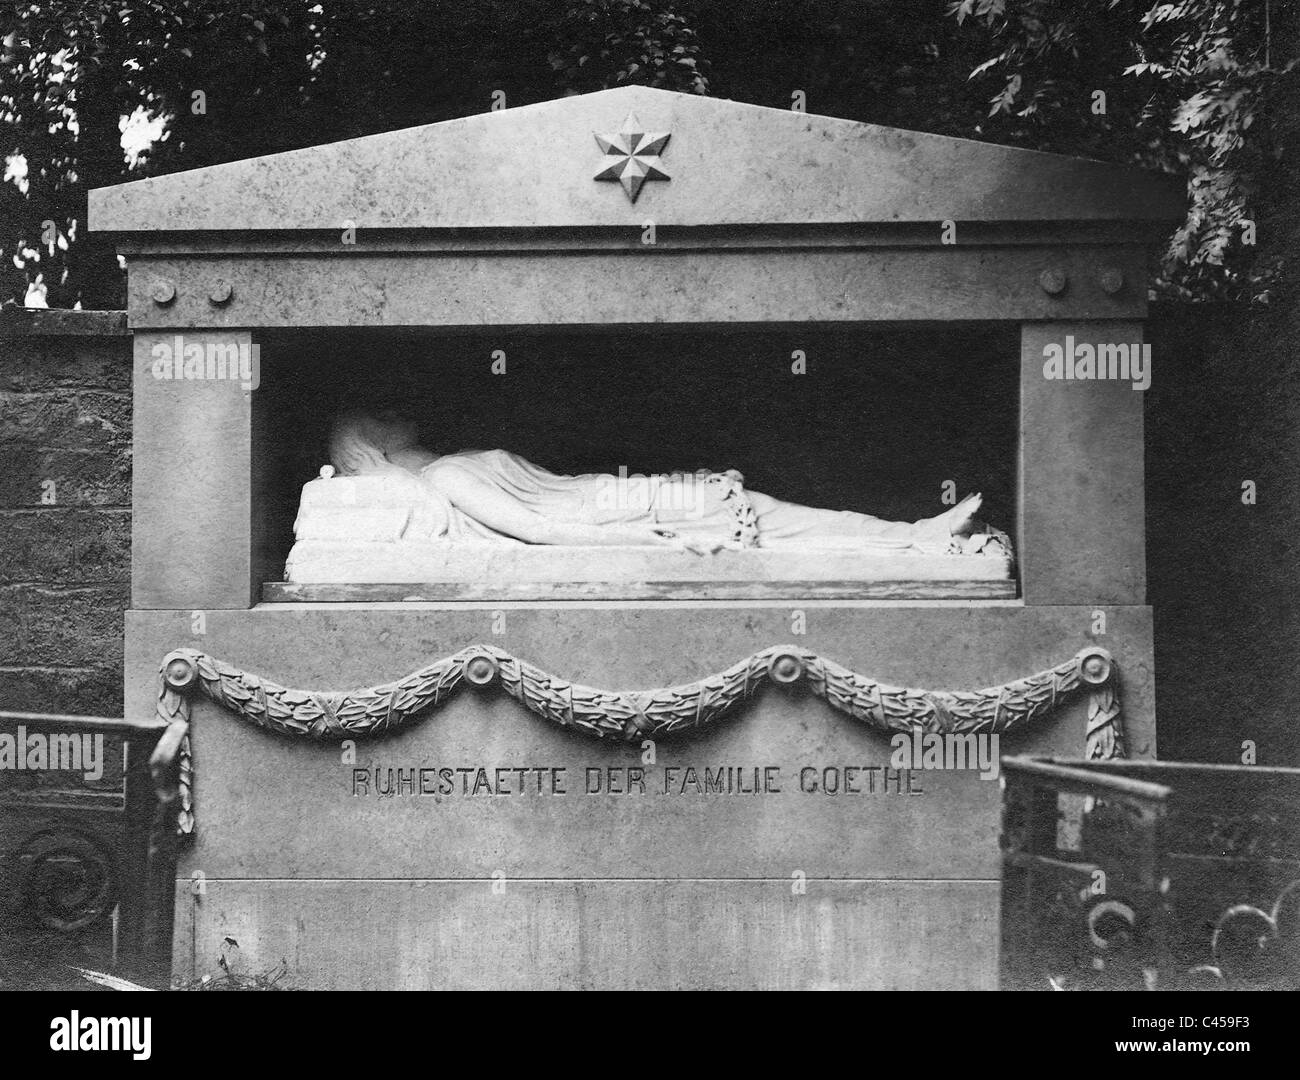 Grave monument for the resting place of the Goethe family in Weimar, 1910 Stock Photo